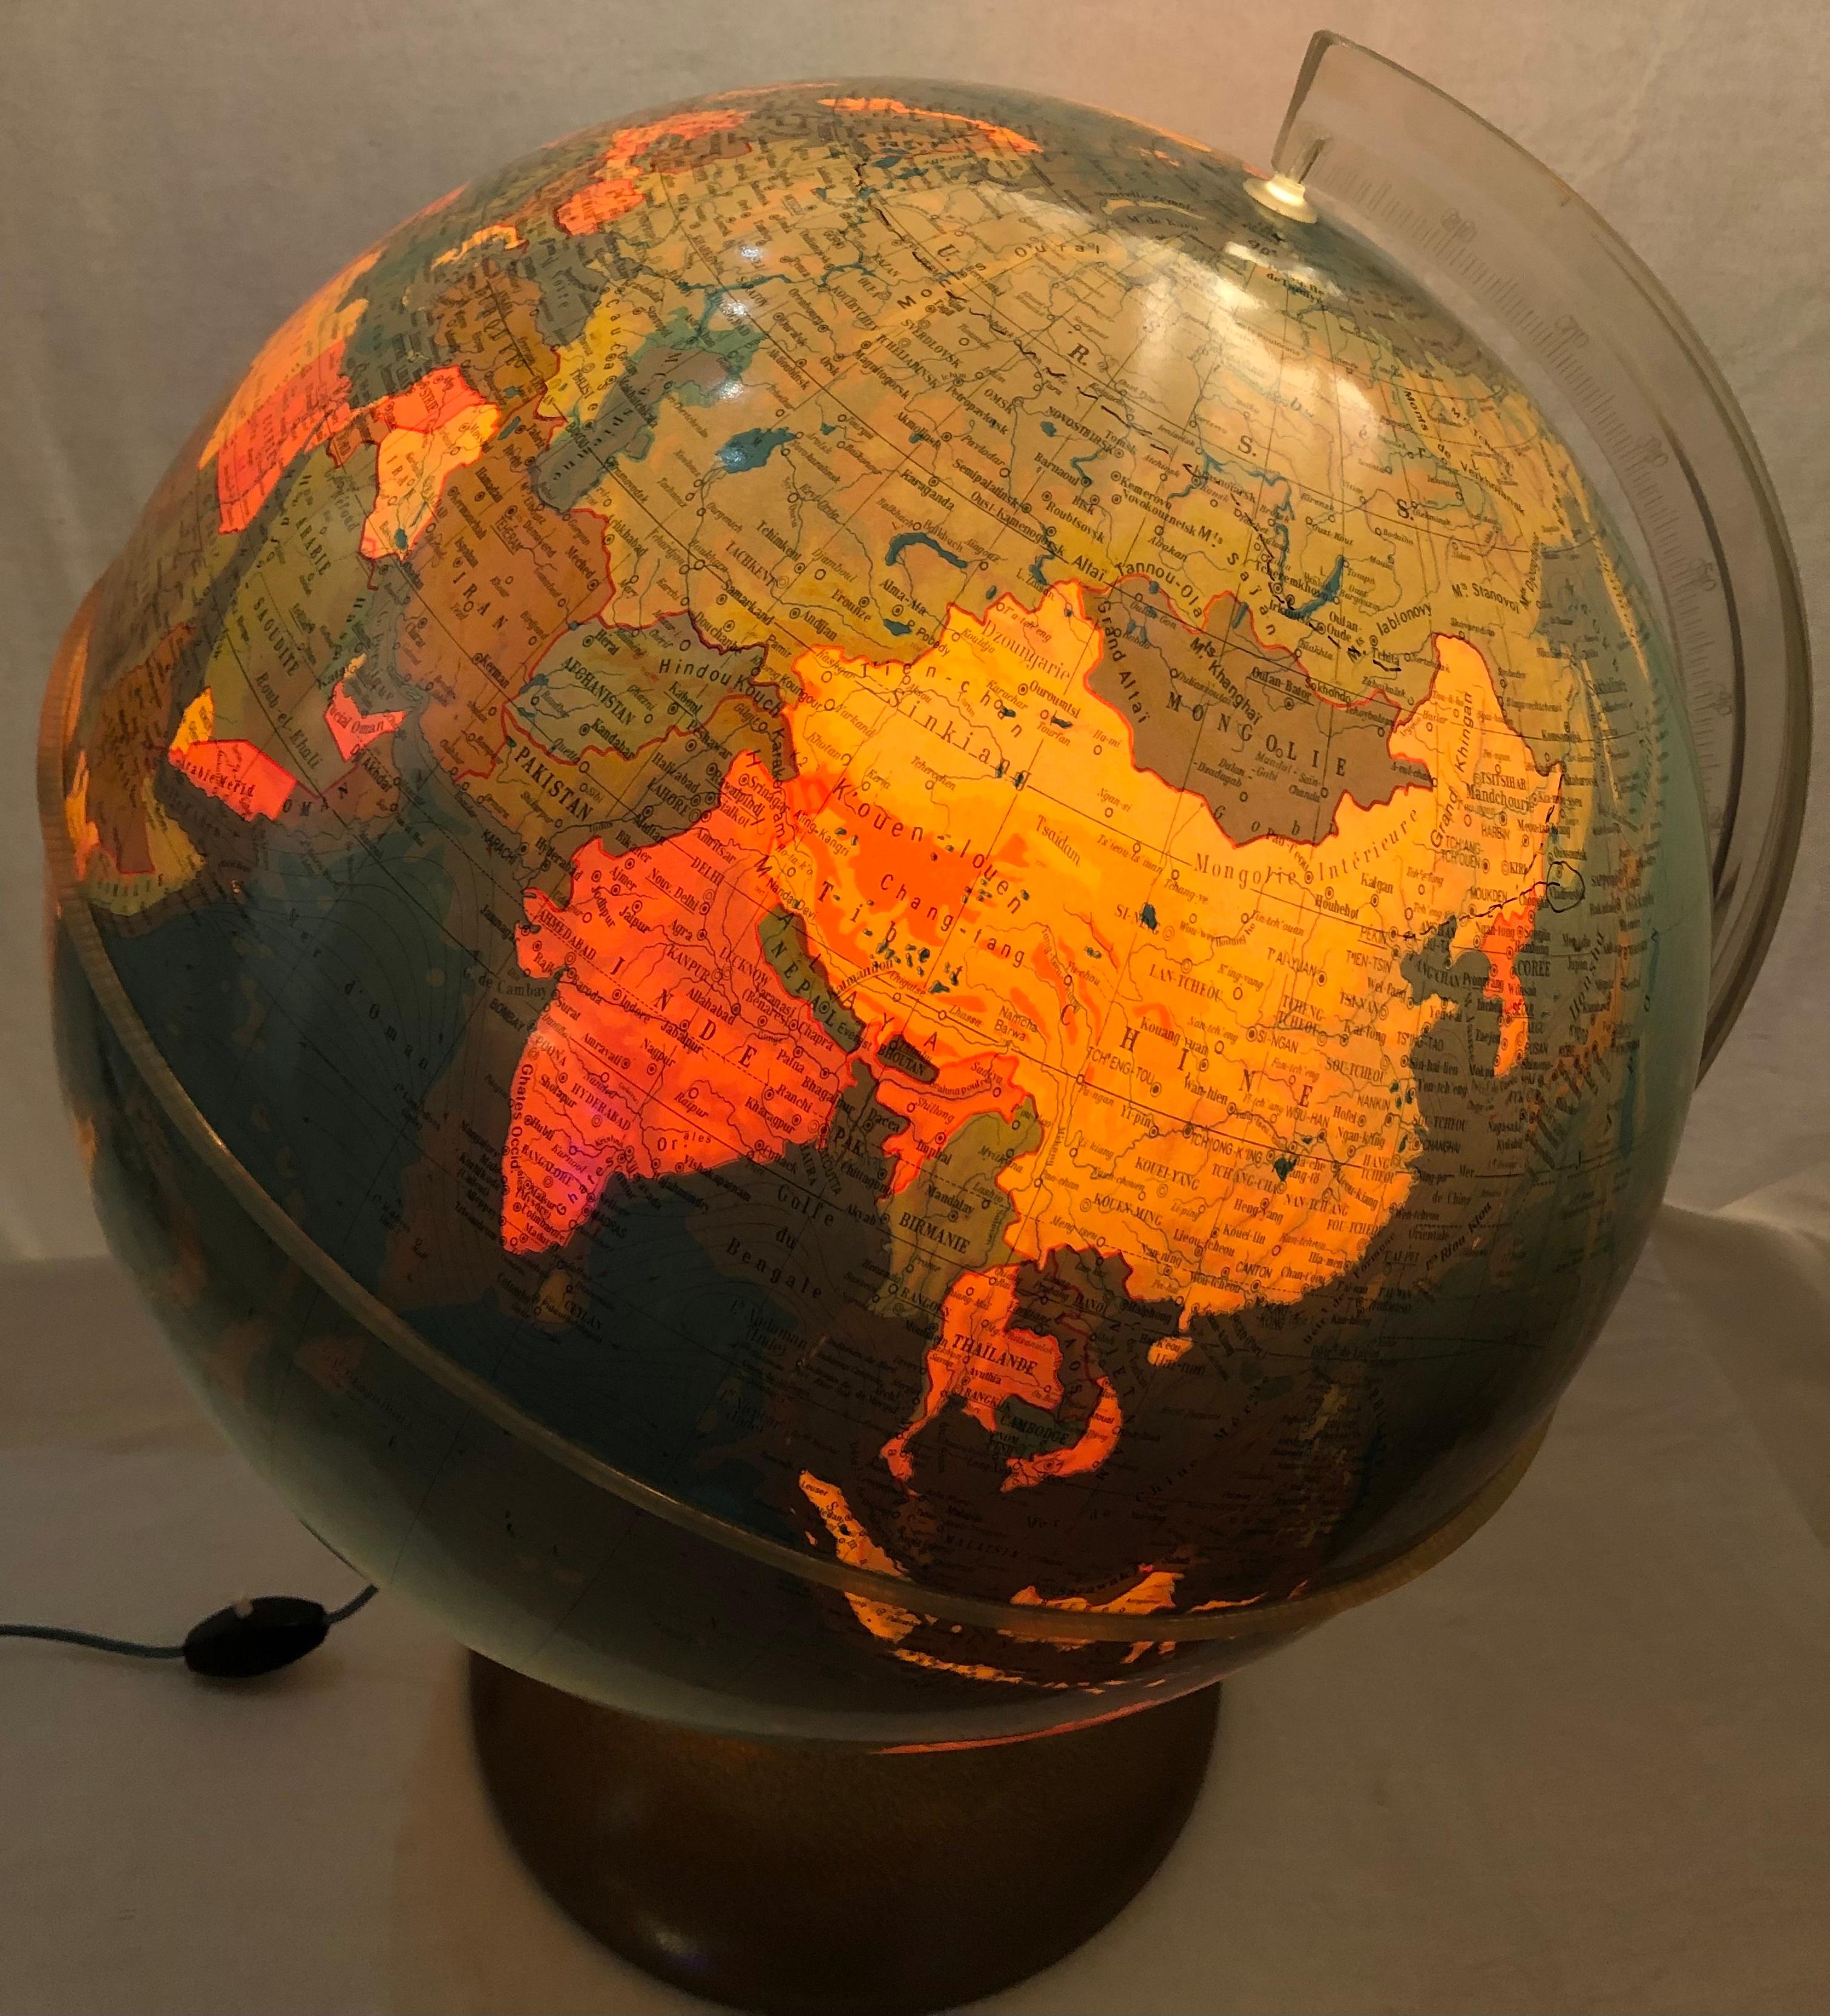 Good quality world map globe lamp. 

If you are looking for stylish and beautiful quality item to upgrade your interior (whether at home or in your office) then this Parisian globe could be ideal. Also, would enhance children's bedrooms or play